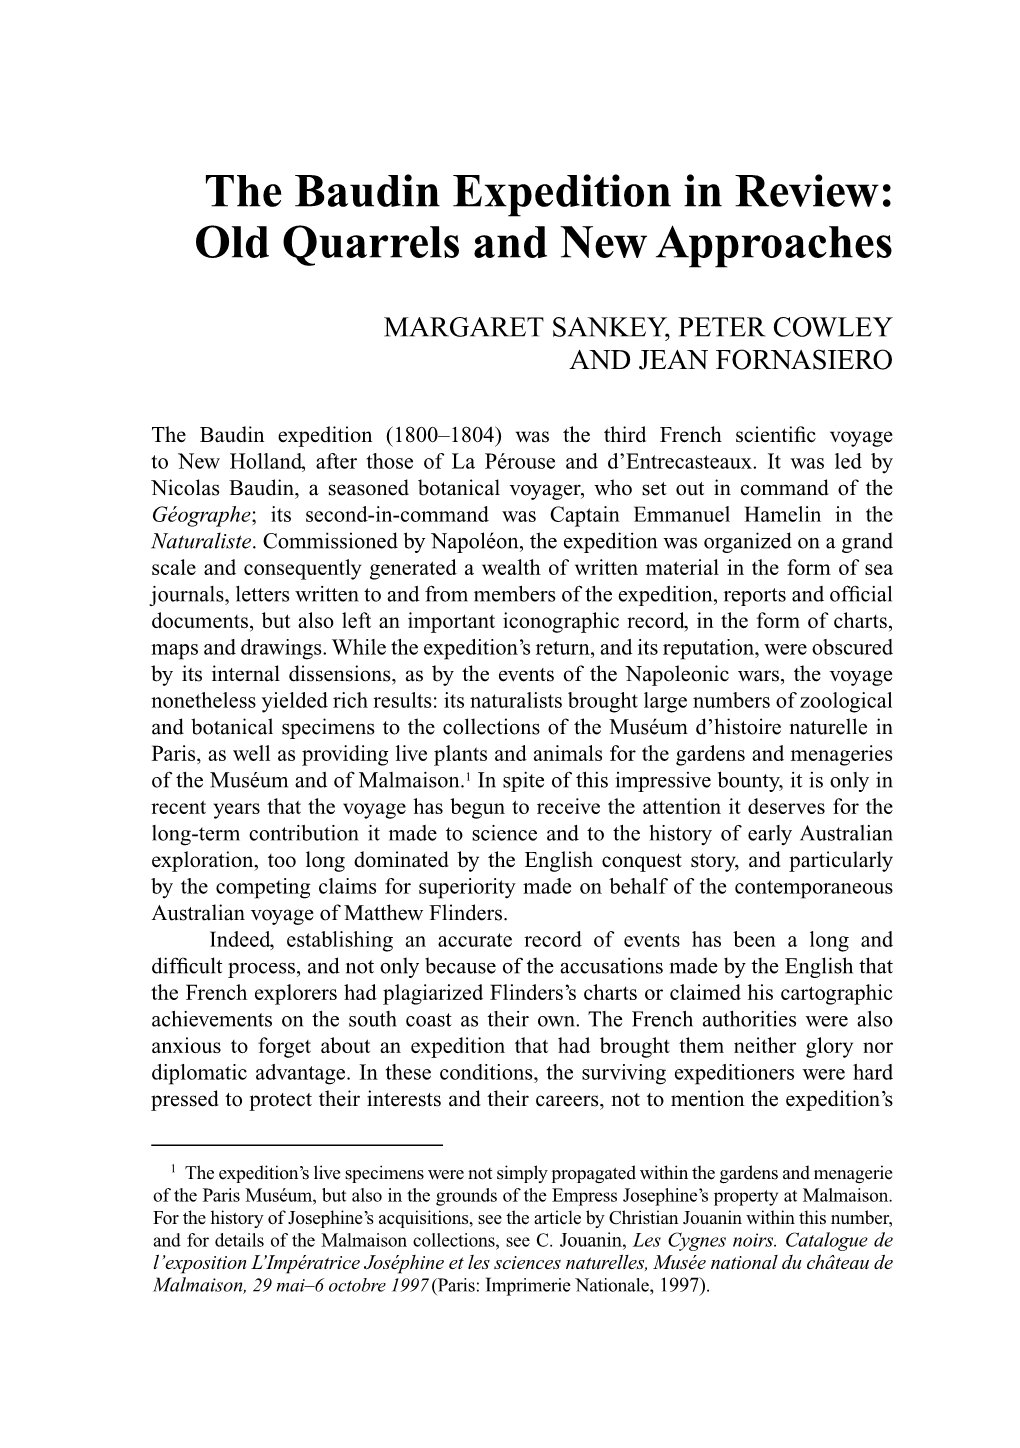 The Baudin Expedition in Review 5 the Baudin Expedition in Review: Old Quarrels and New Approaches